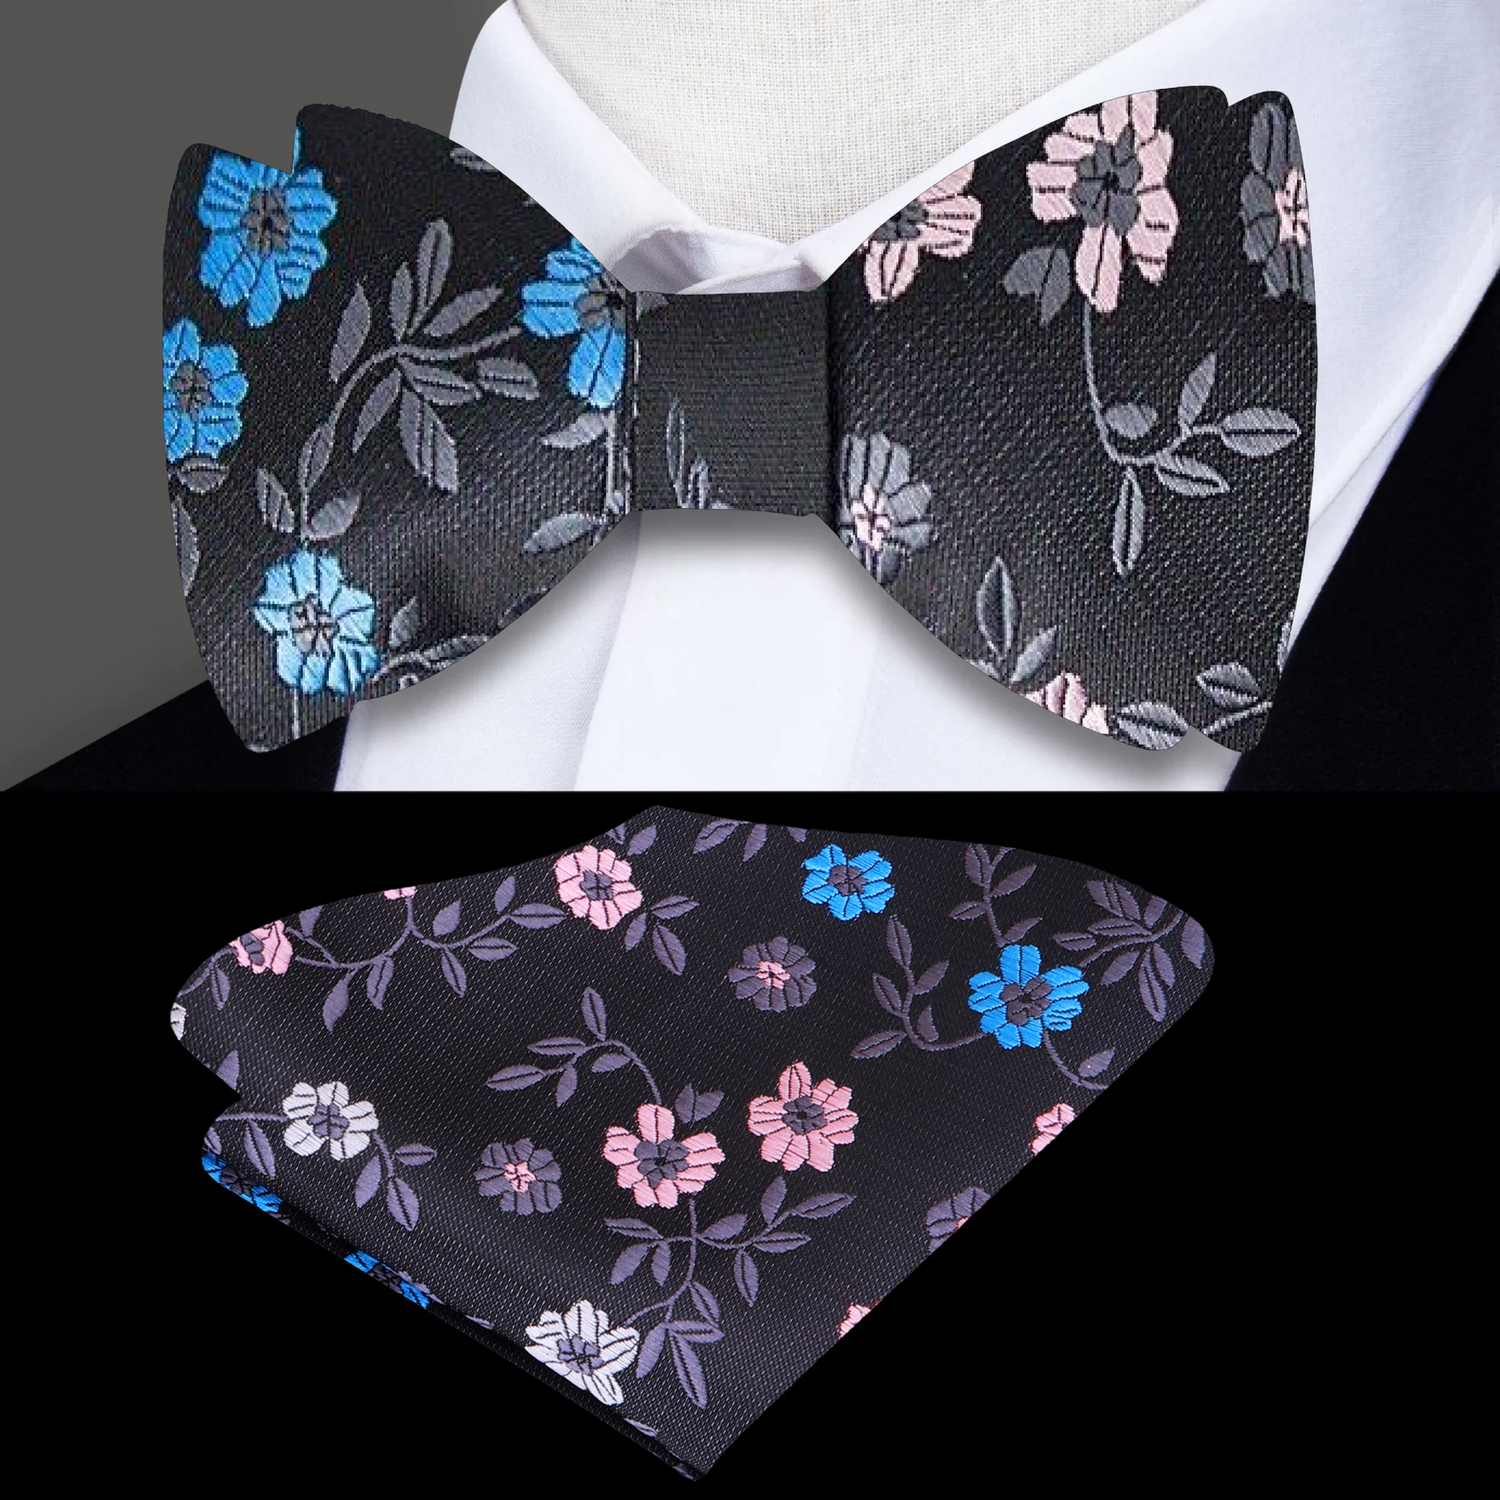 A Black, Grey, Pink, Blue Floral Pattern Silk Self Tie Bow Tie, With Matching Pocket Square||Black, Grey, Pink, Blue